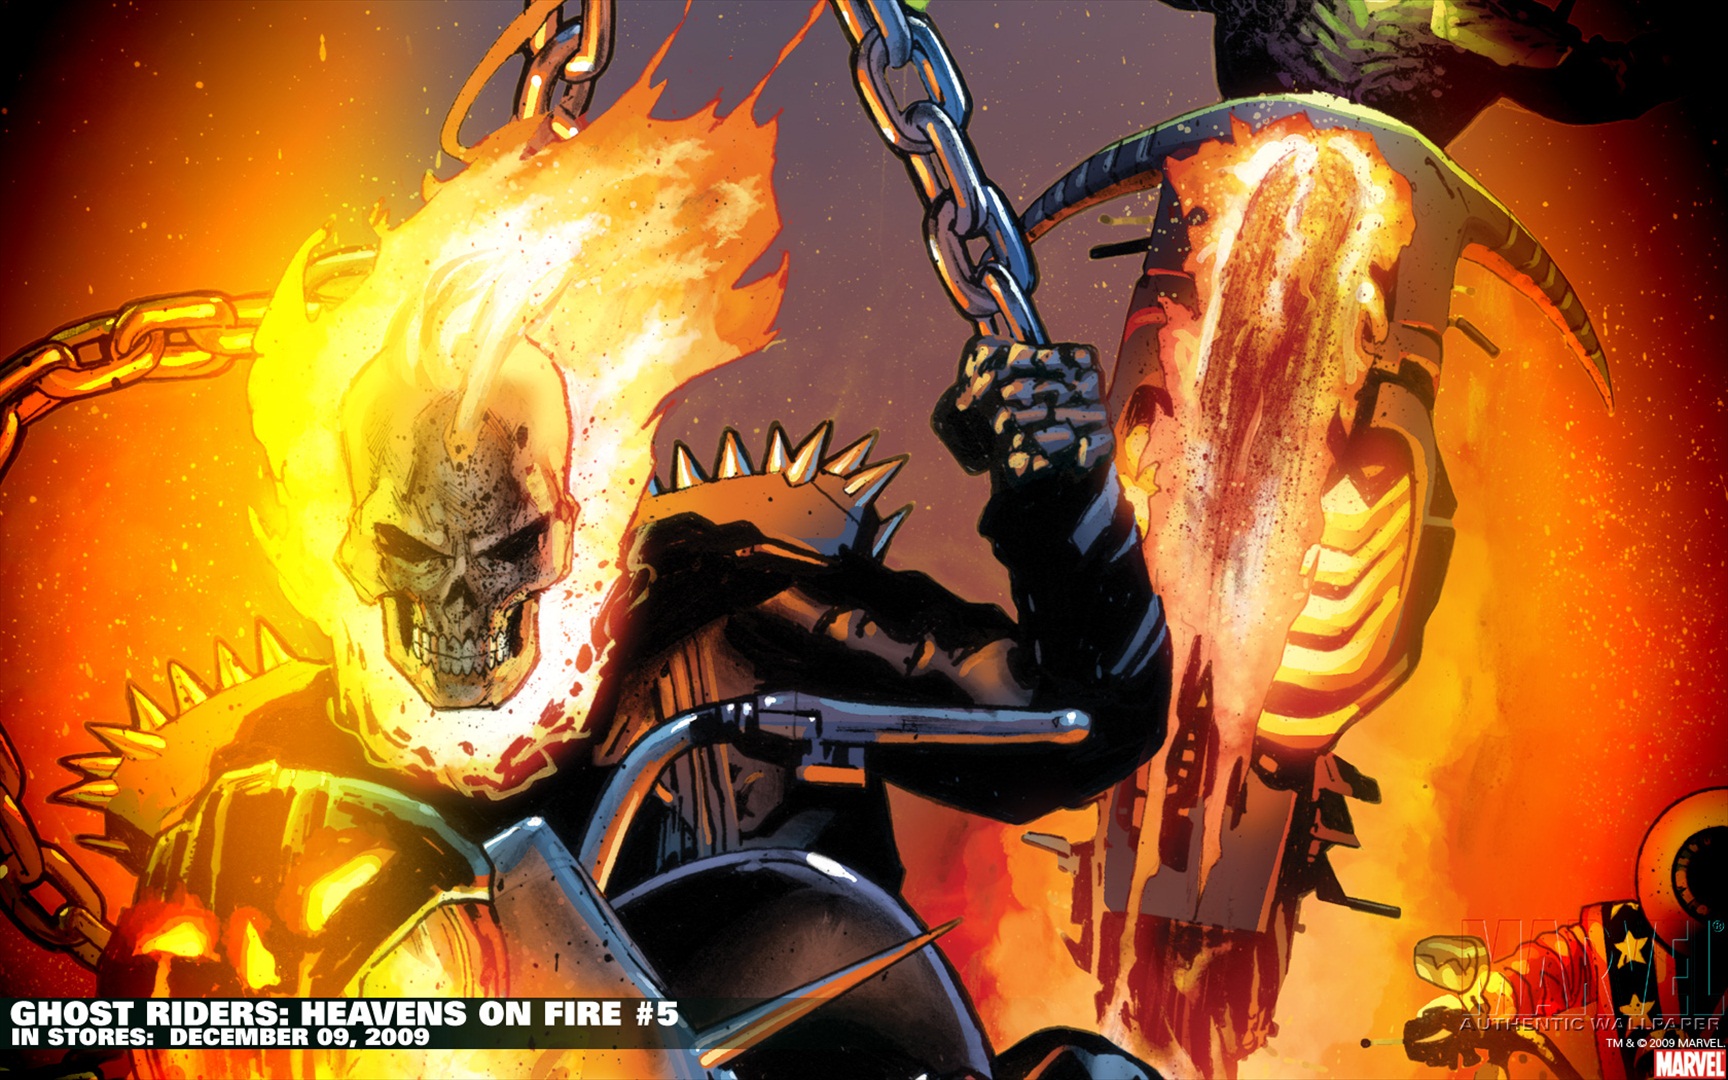 Ghost Rider in action with fiery motorcycle. Intense comic book-inspired desktop wallpaper.